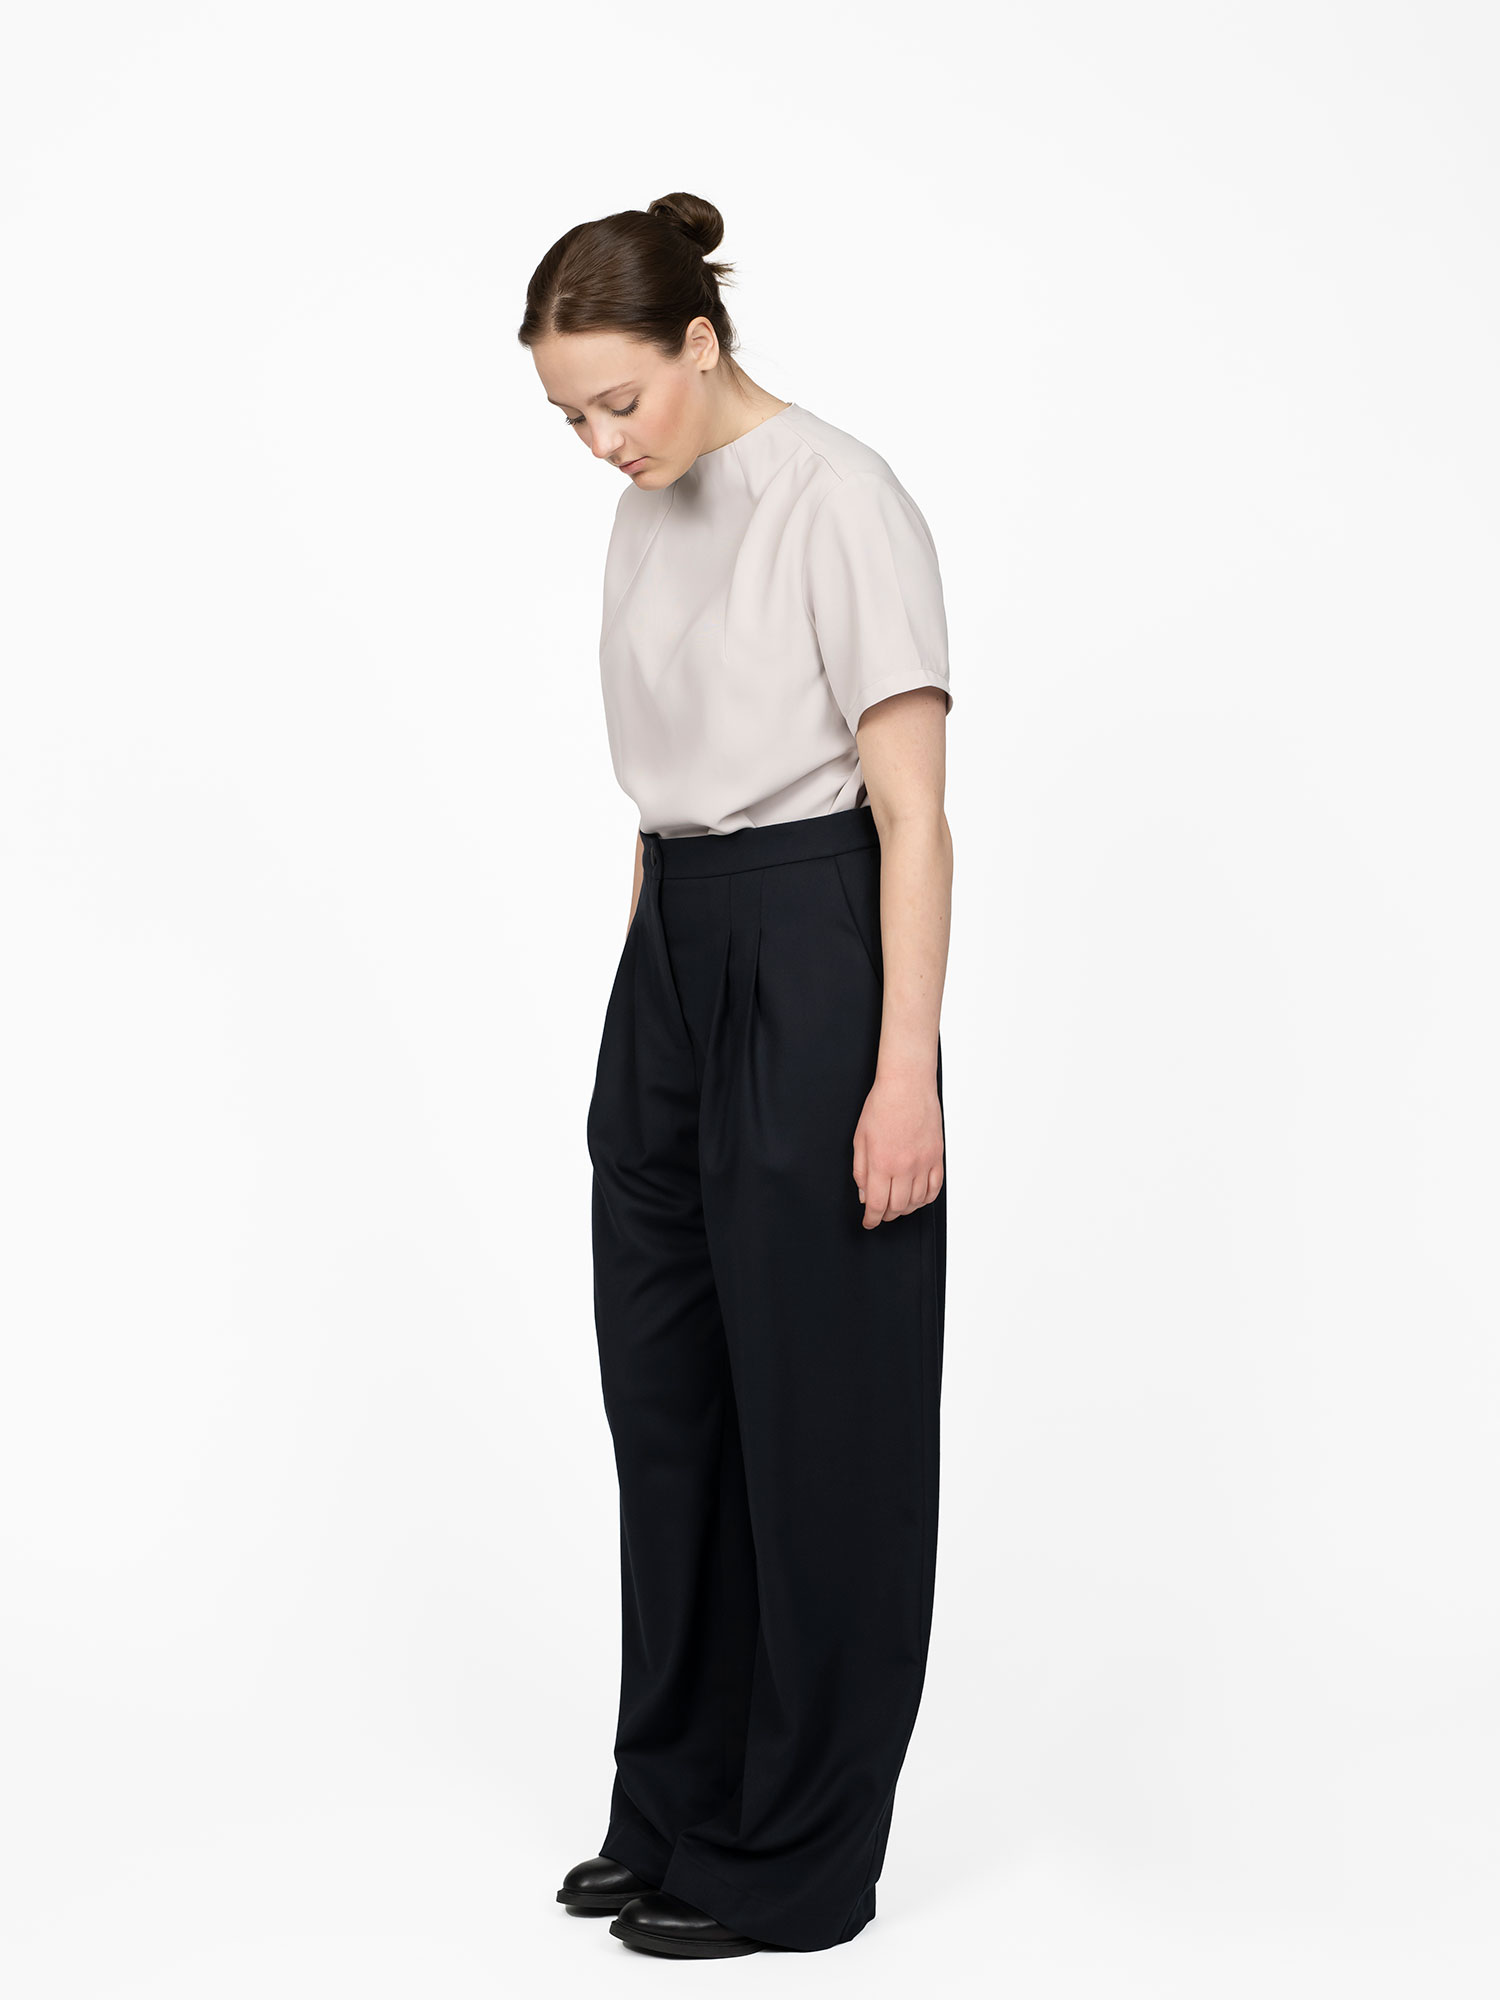 The Assembly Line Funnel Neck Top - The Fold Line